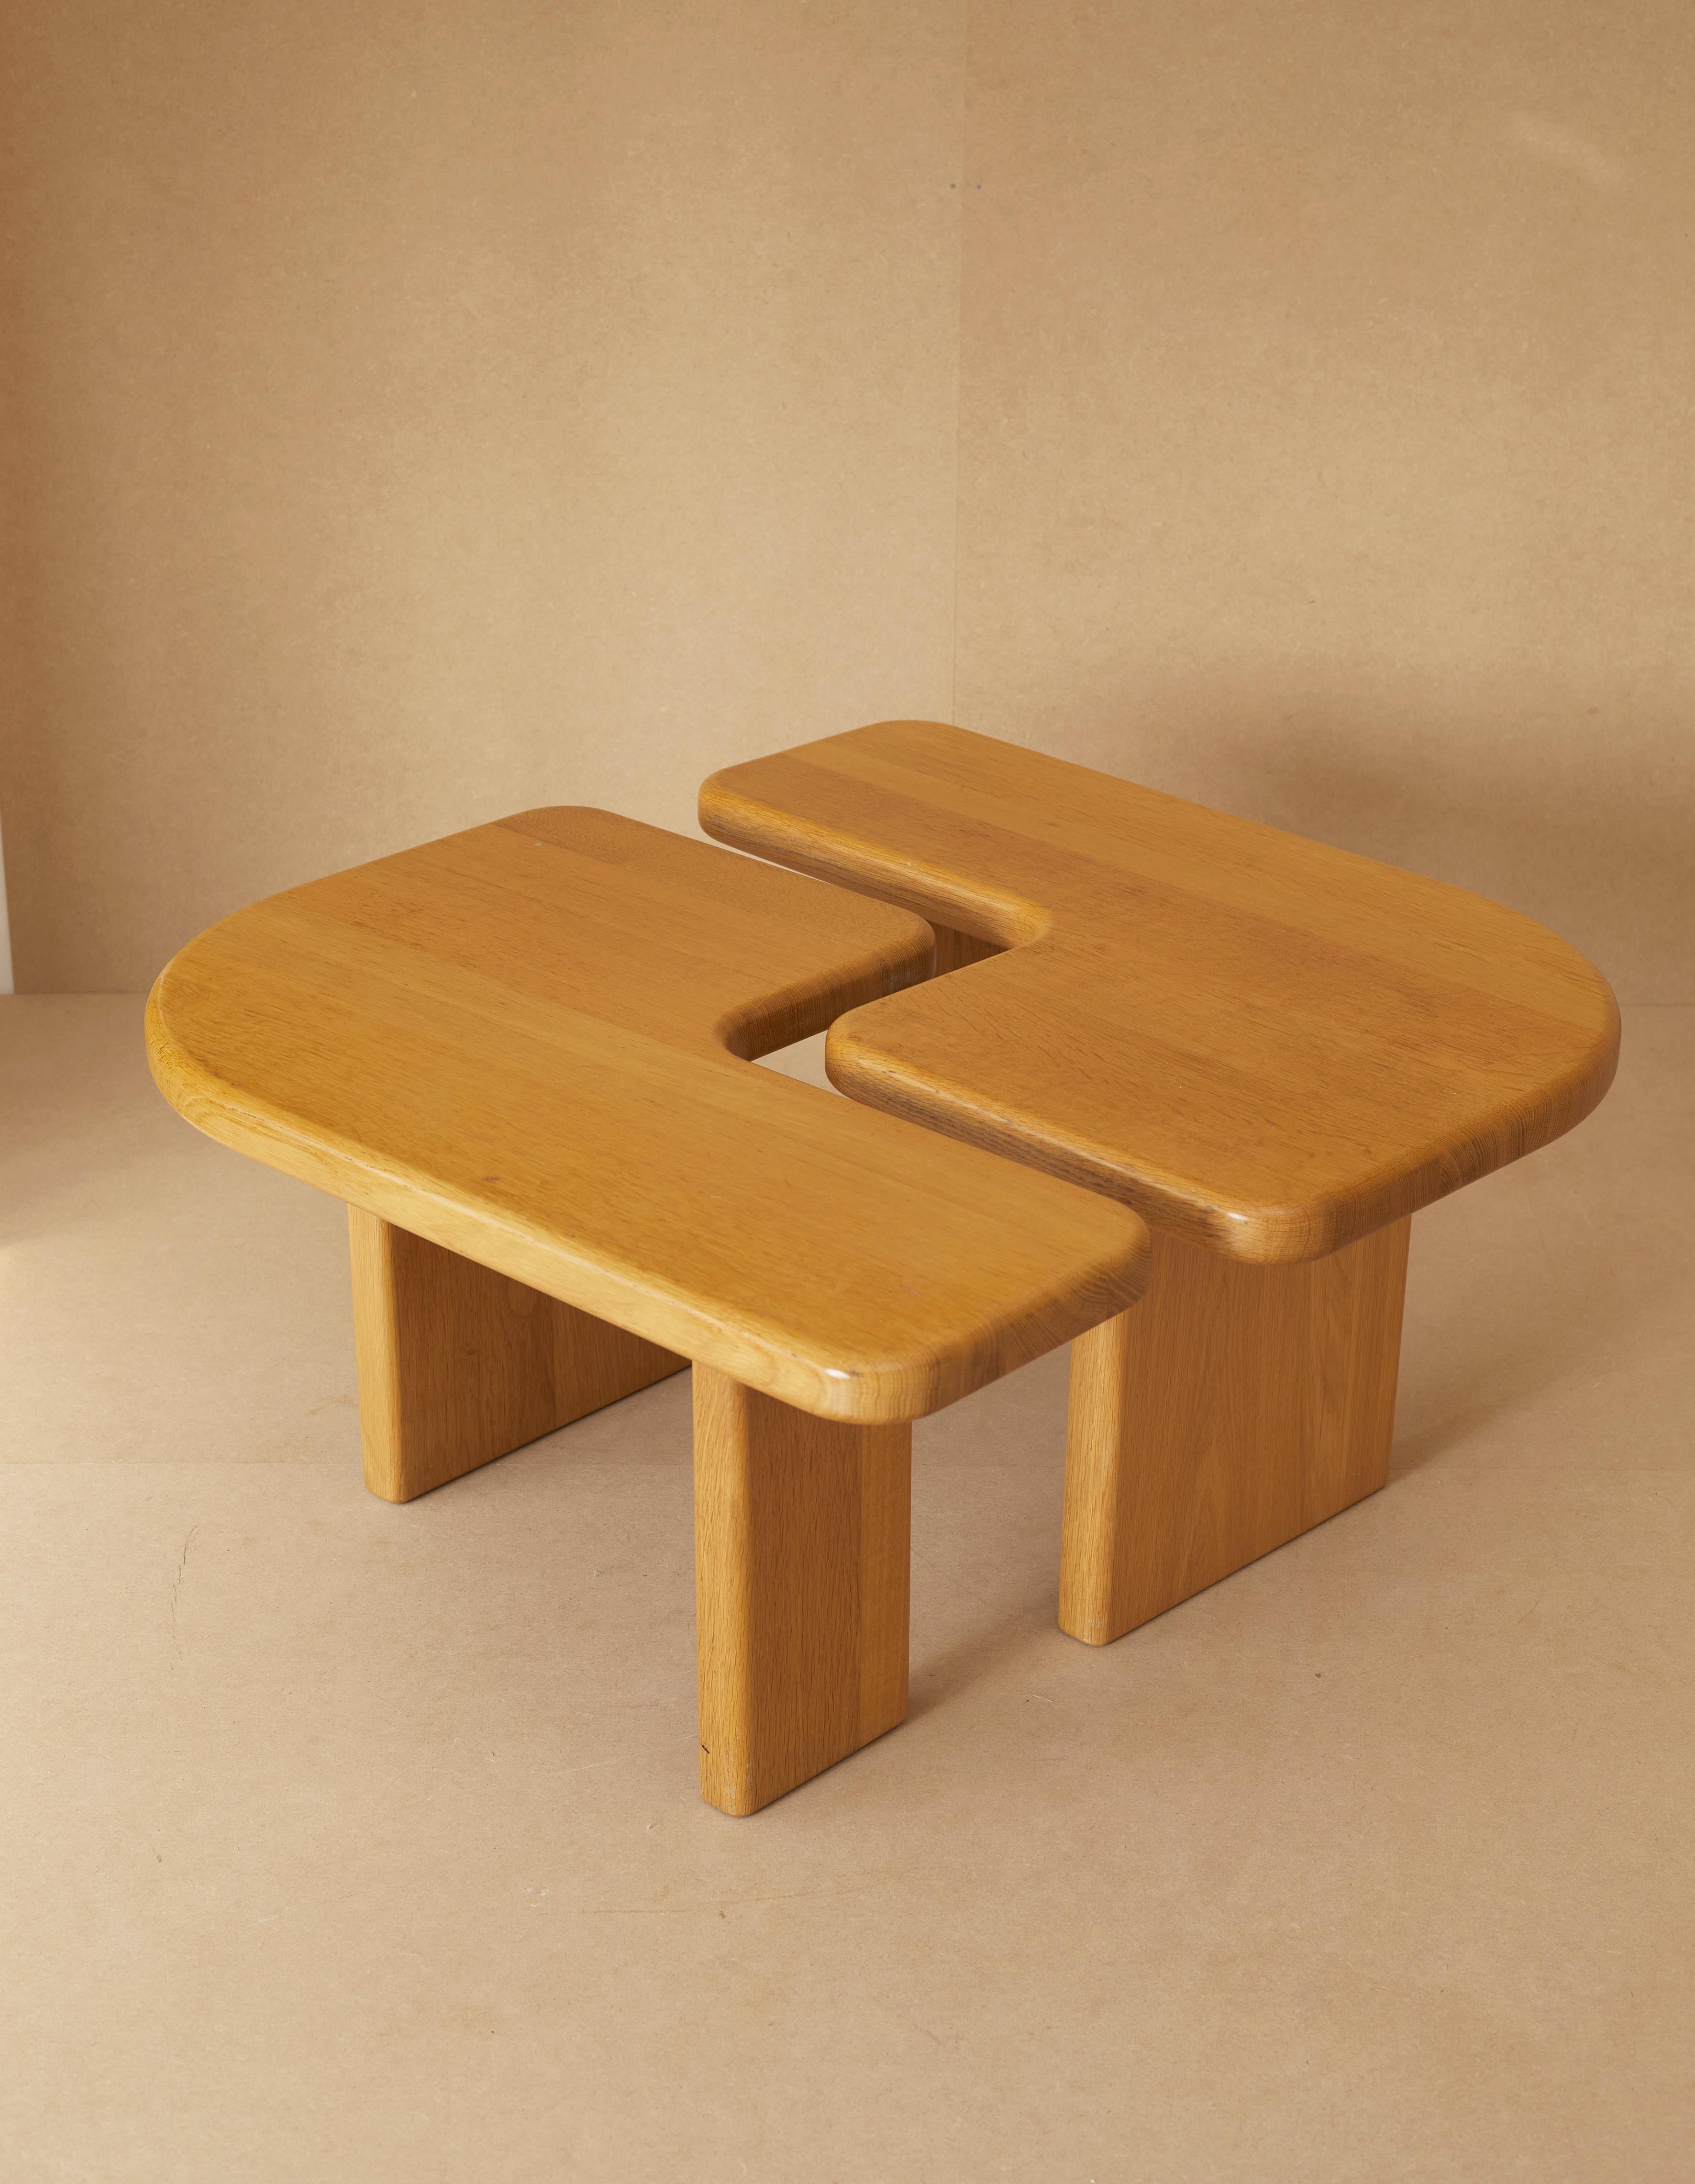 Twin coffee tables by Redureau, France, circa 1980. Limited, made-to-order edition in solid oak. 

Redureau was a small, French edition house which produced in the 1970-80s limited edition furniture in solid oak. Each piece was made-to-order and